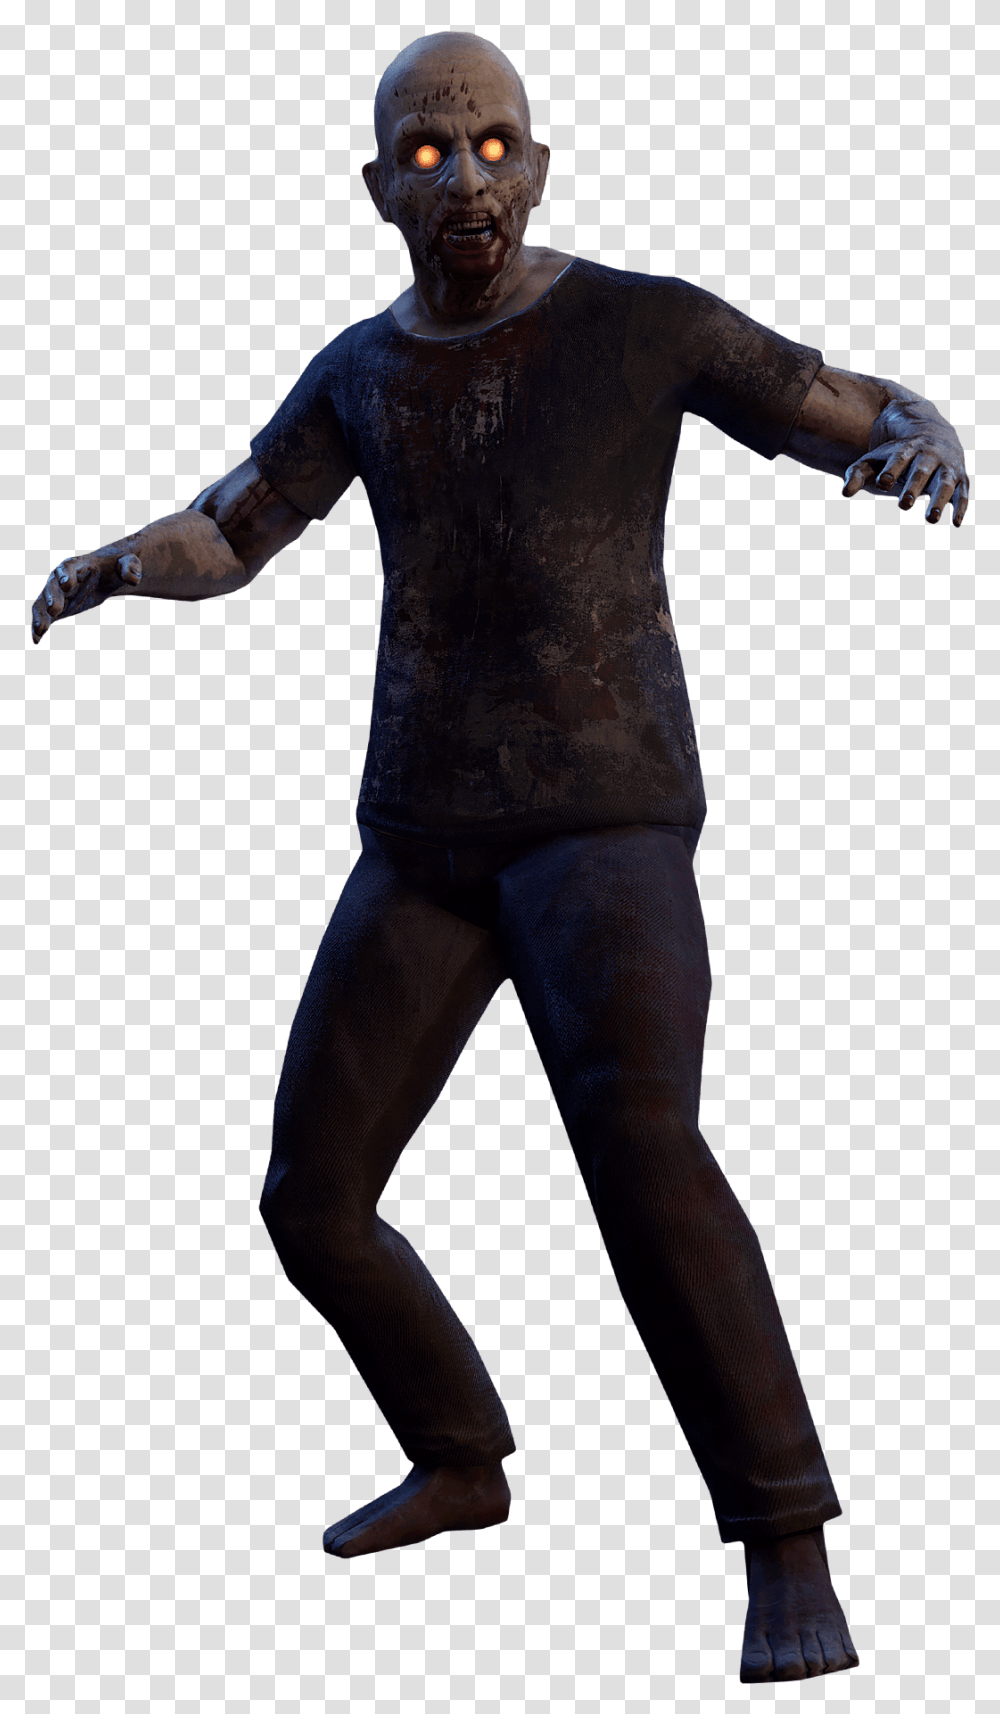 Zombie Zombie Survival In Vr Vr Zombie Game, Person, Leisure Activities, Dance Pose Transparent Png